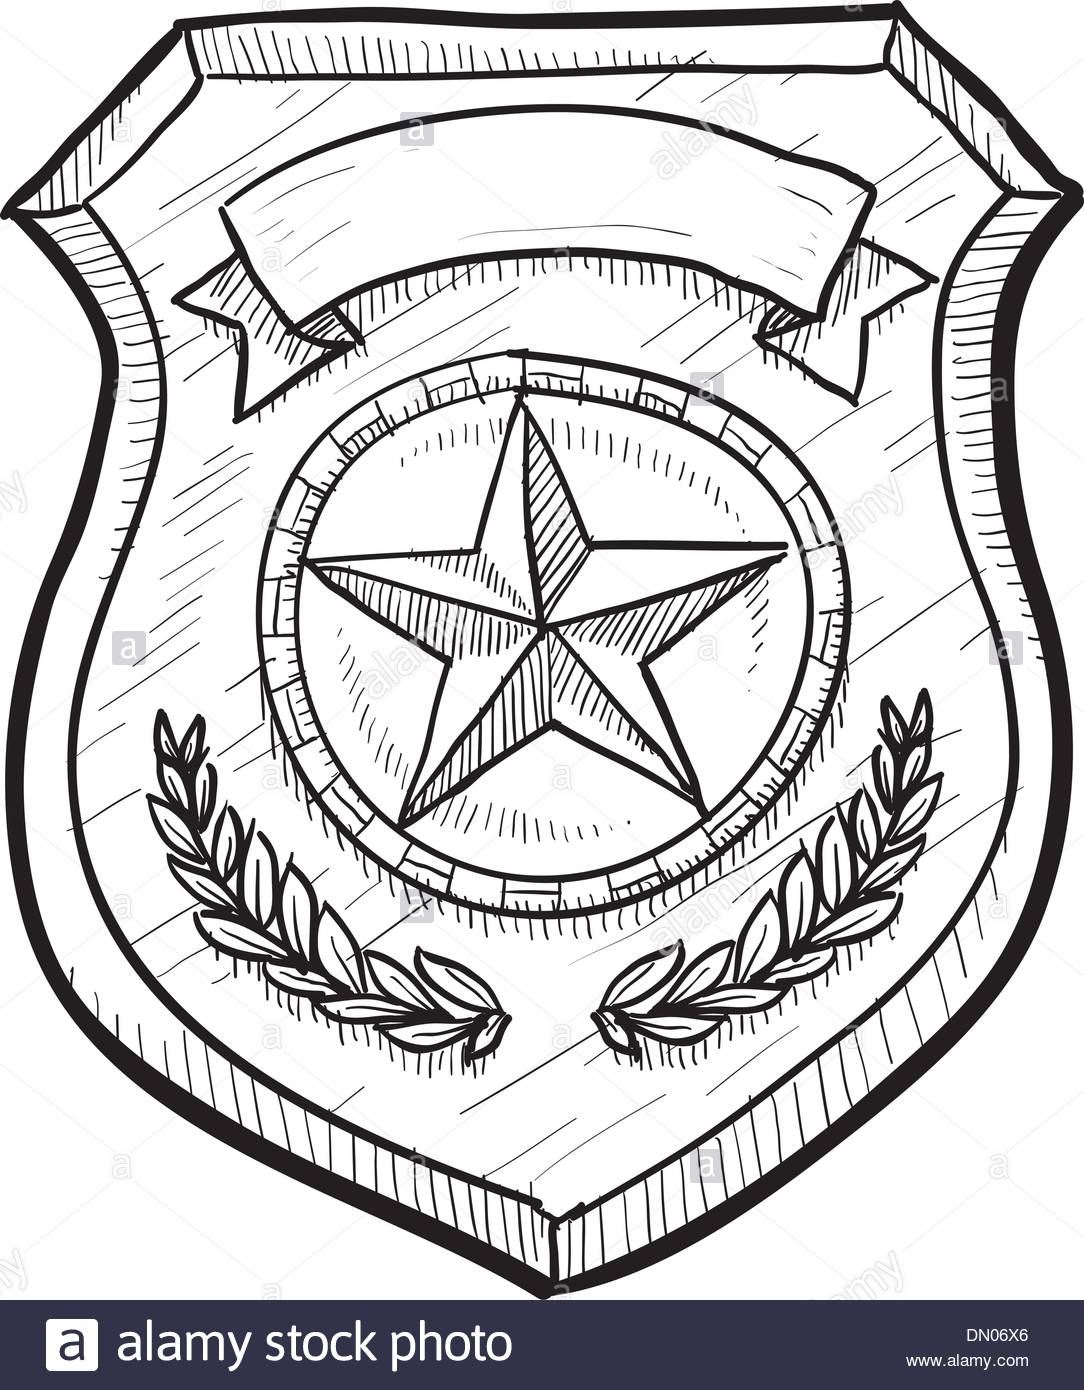 Police Badge Drawing Easy / Police badge simple monochrome sign